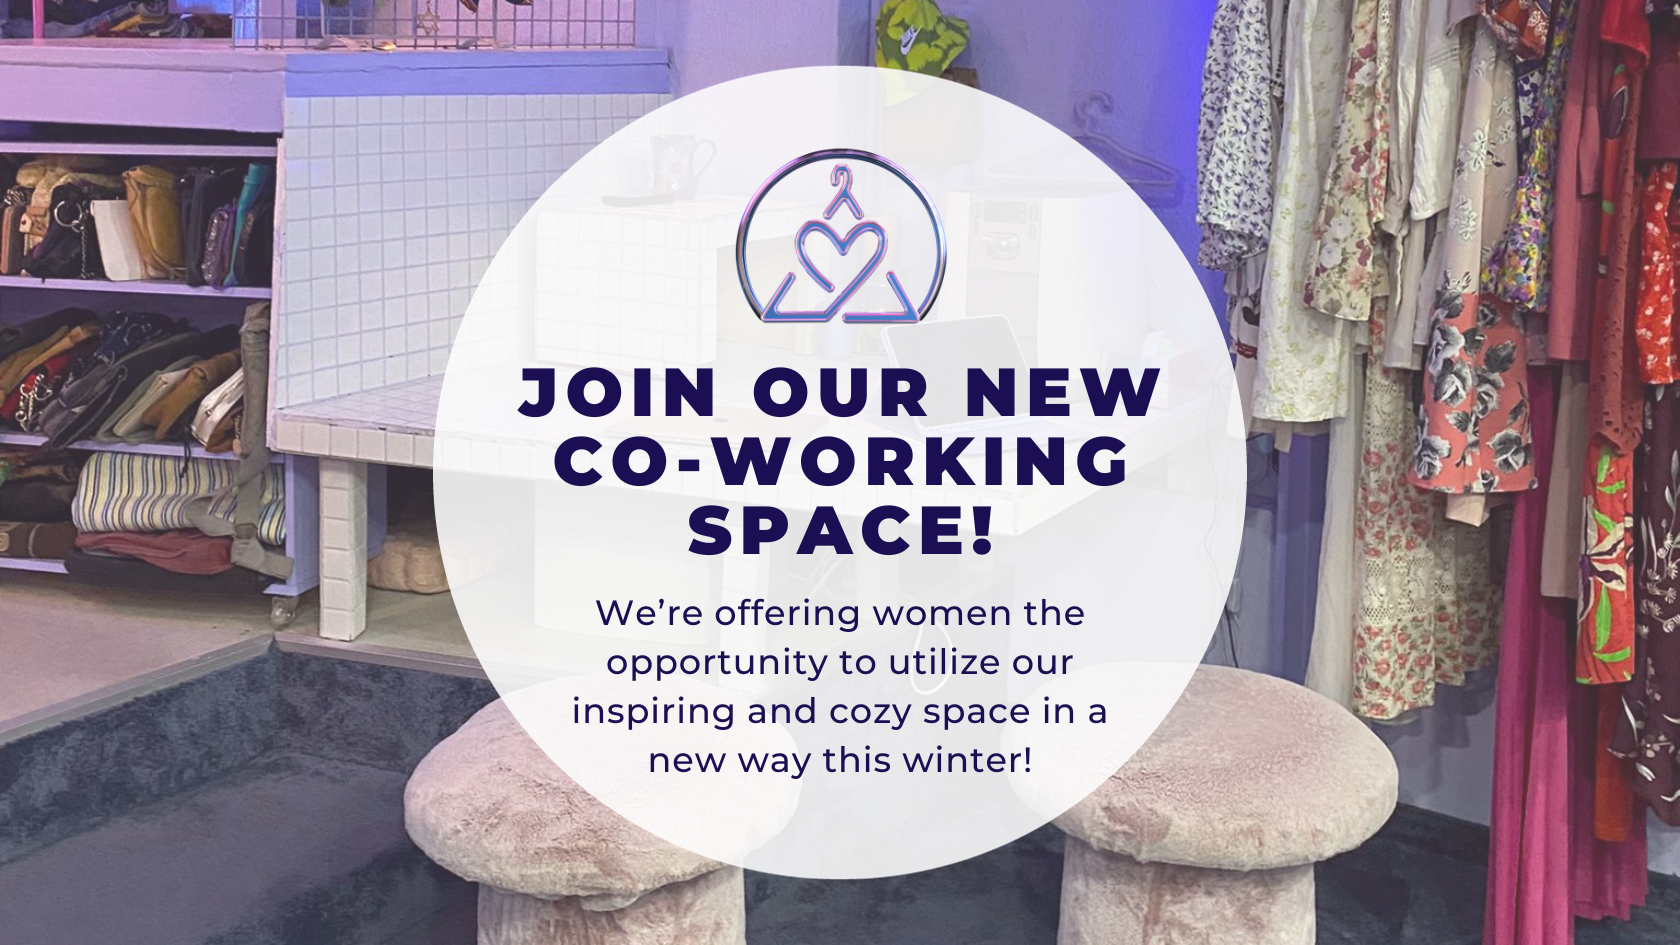 Introducing Our New Women's Co-Working Space!